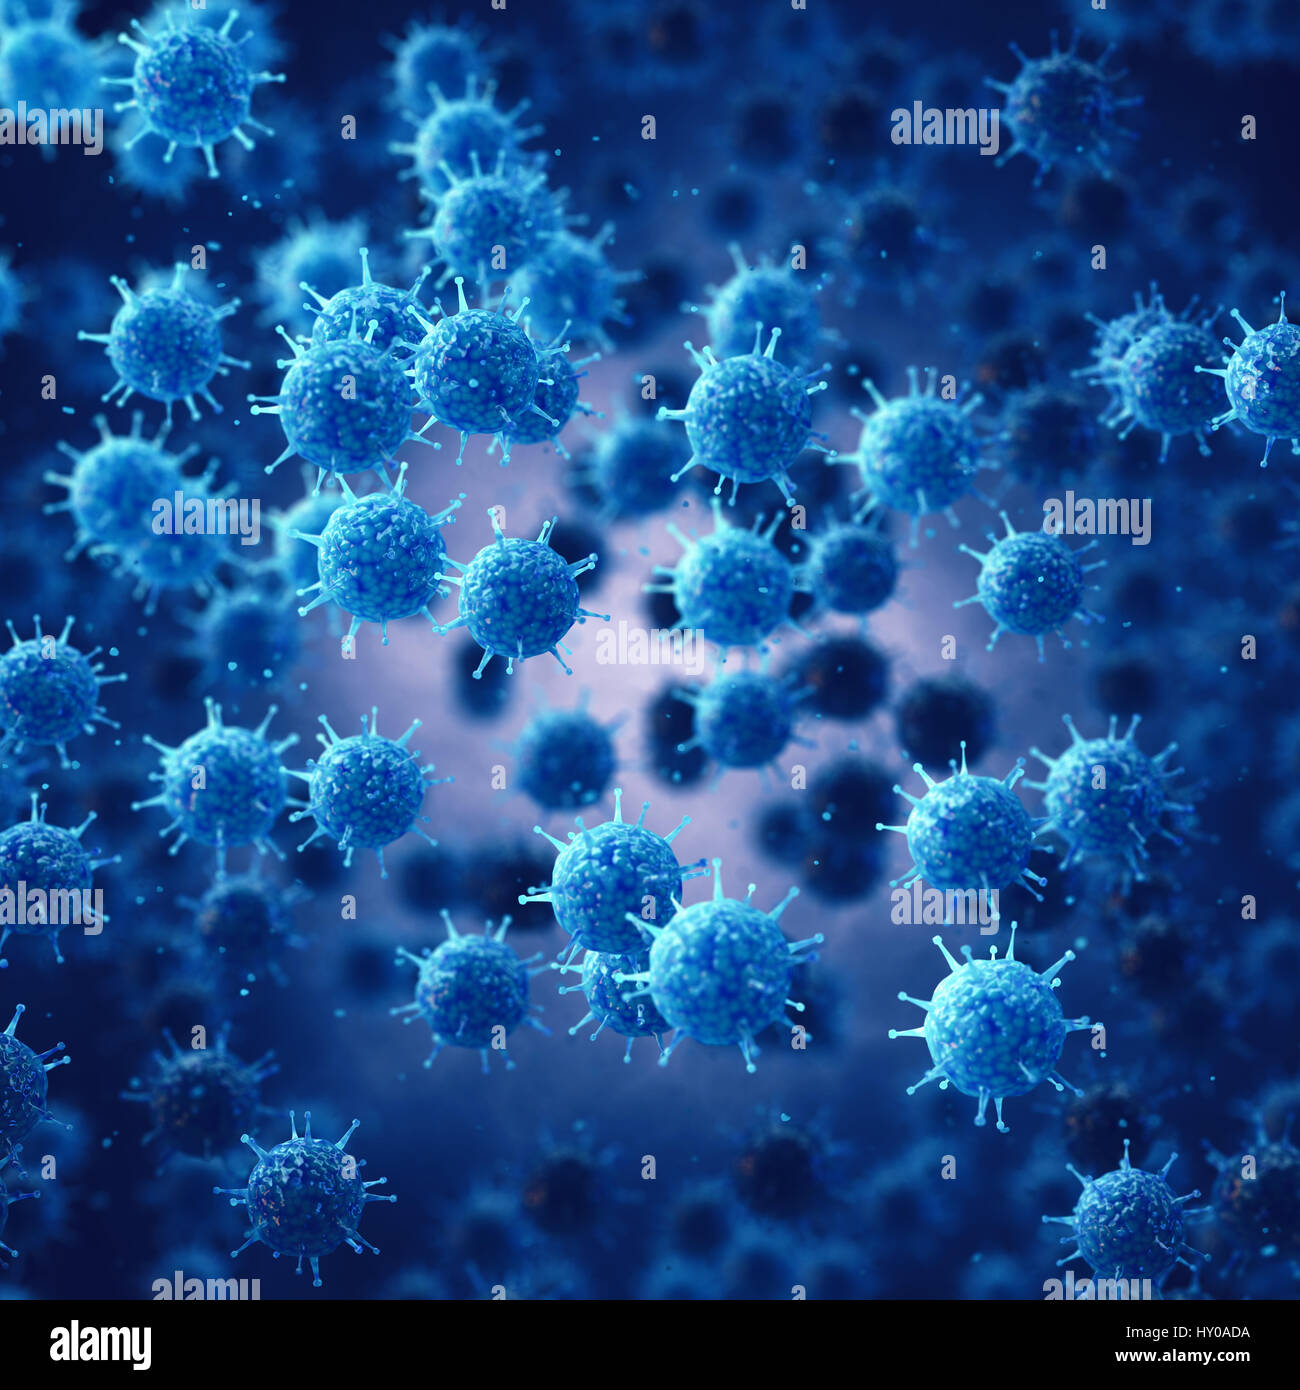 Viruses are infectious pathogens that replicates in living cells , Viral disease epidemic Stock Photo